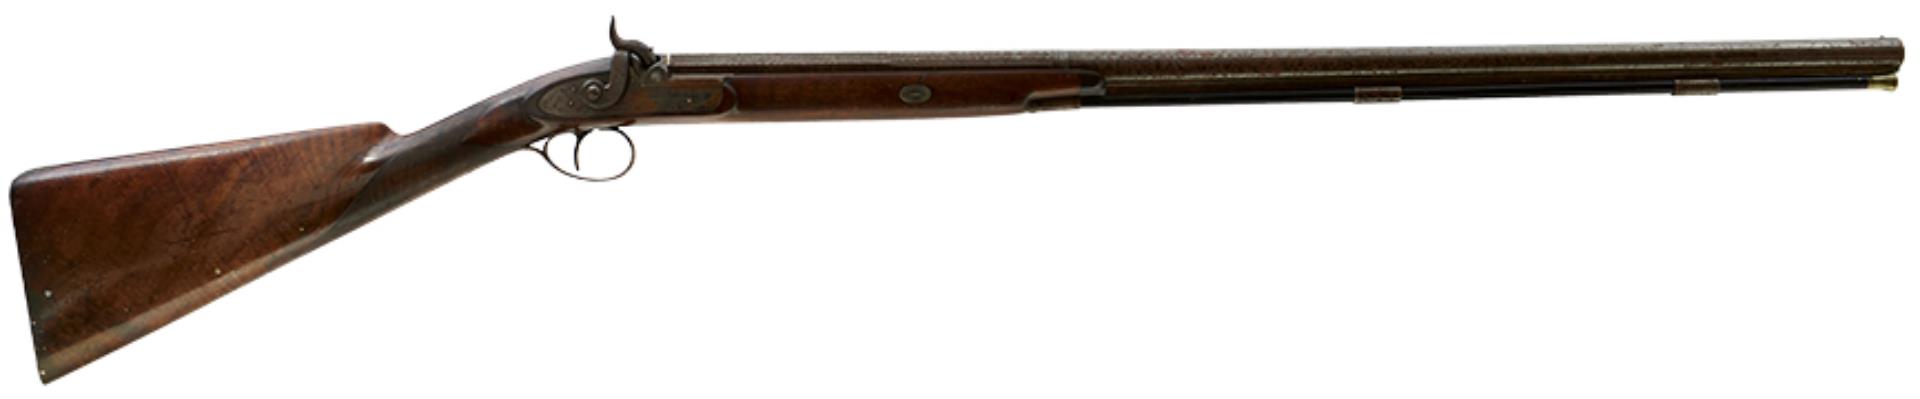 AN 18-BORE PERCUSSION SPORTING GUN BY WHEELER & SON, 32inch sighted multi-stage barrel engraved